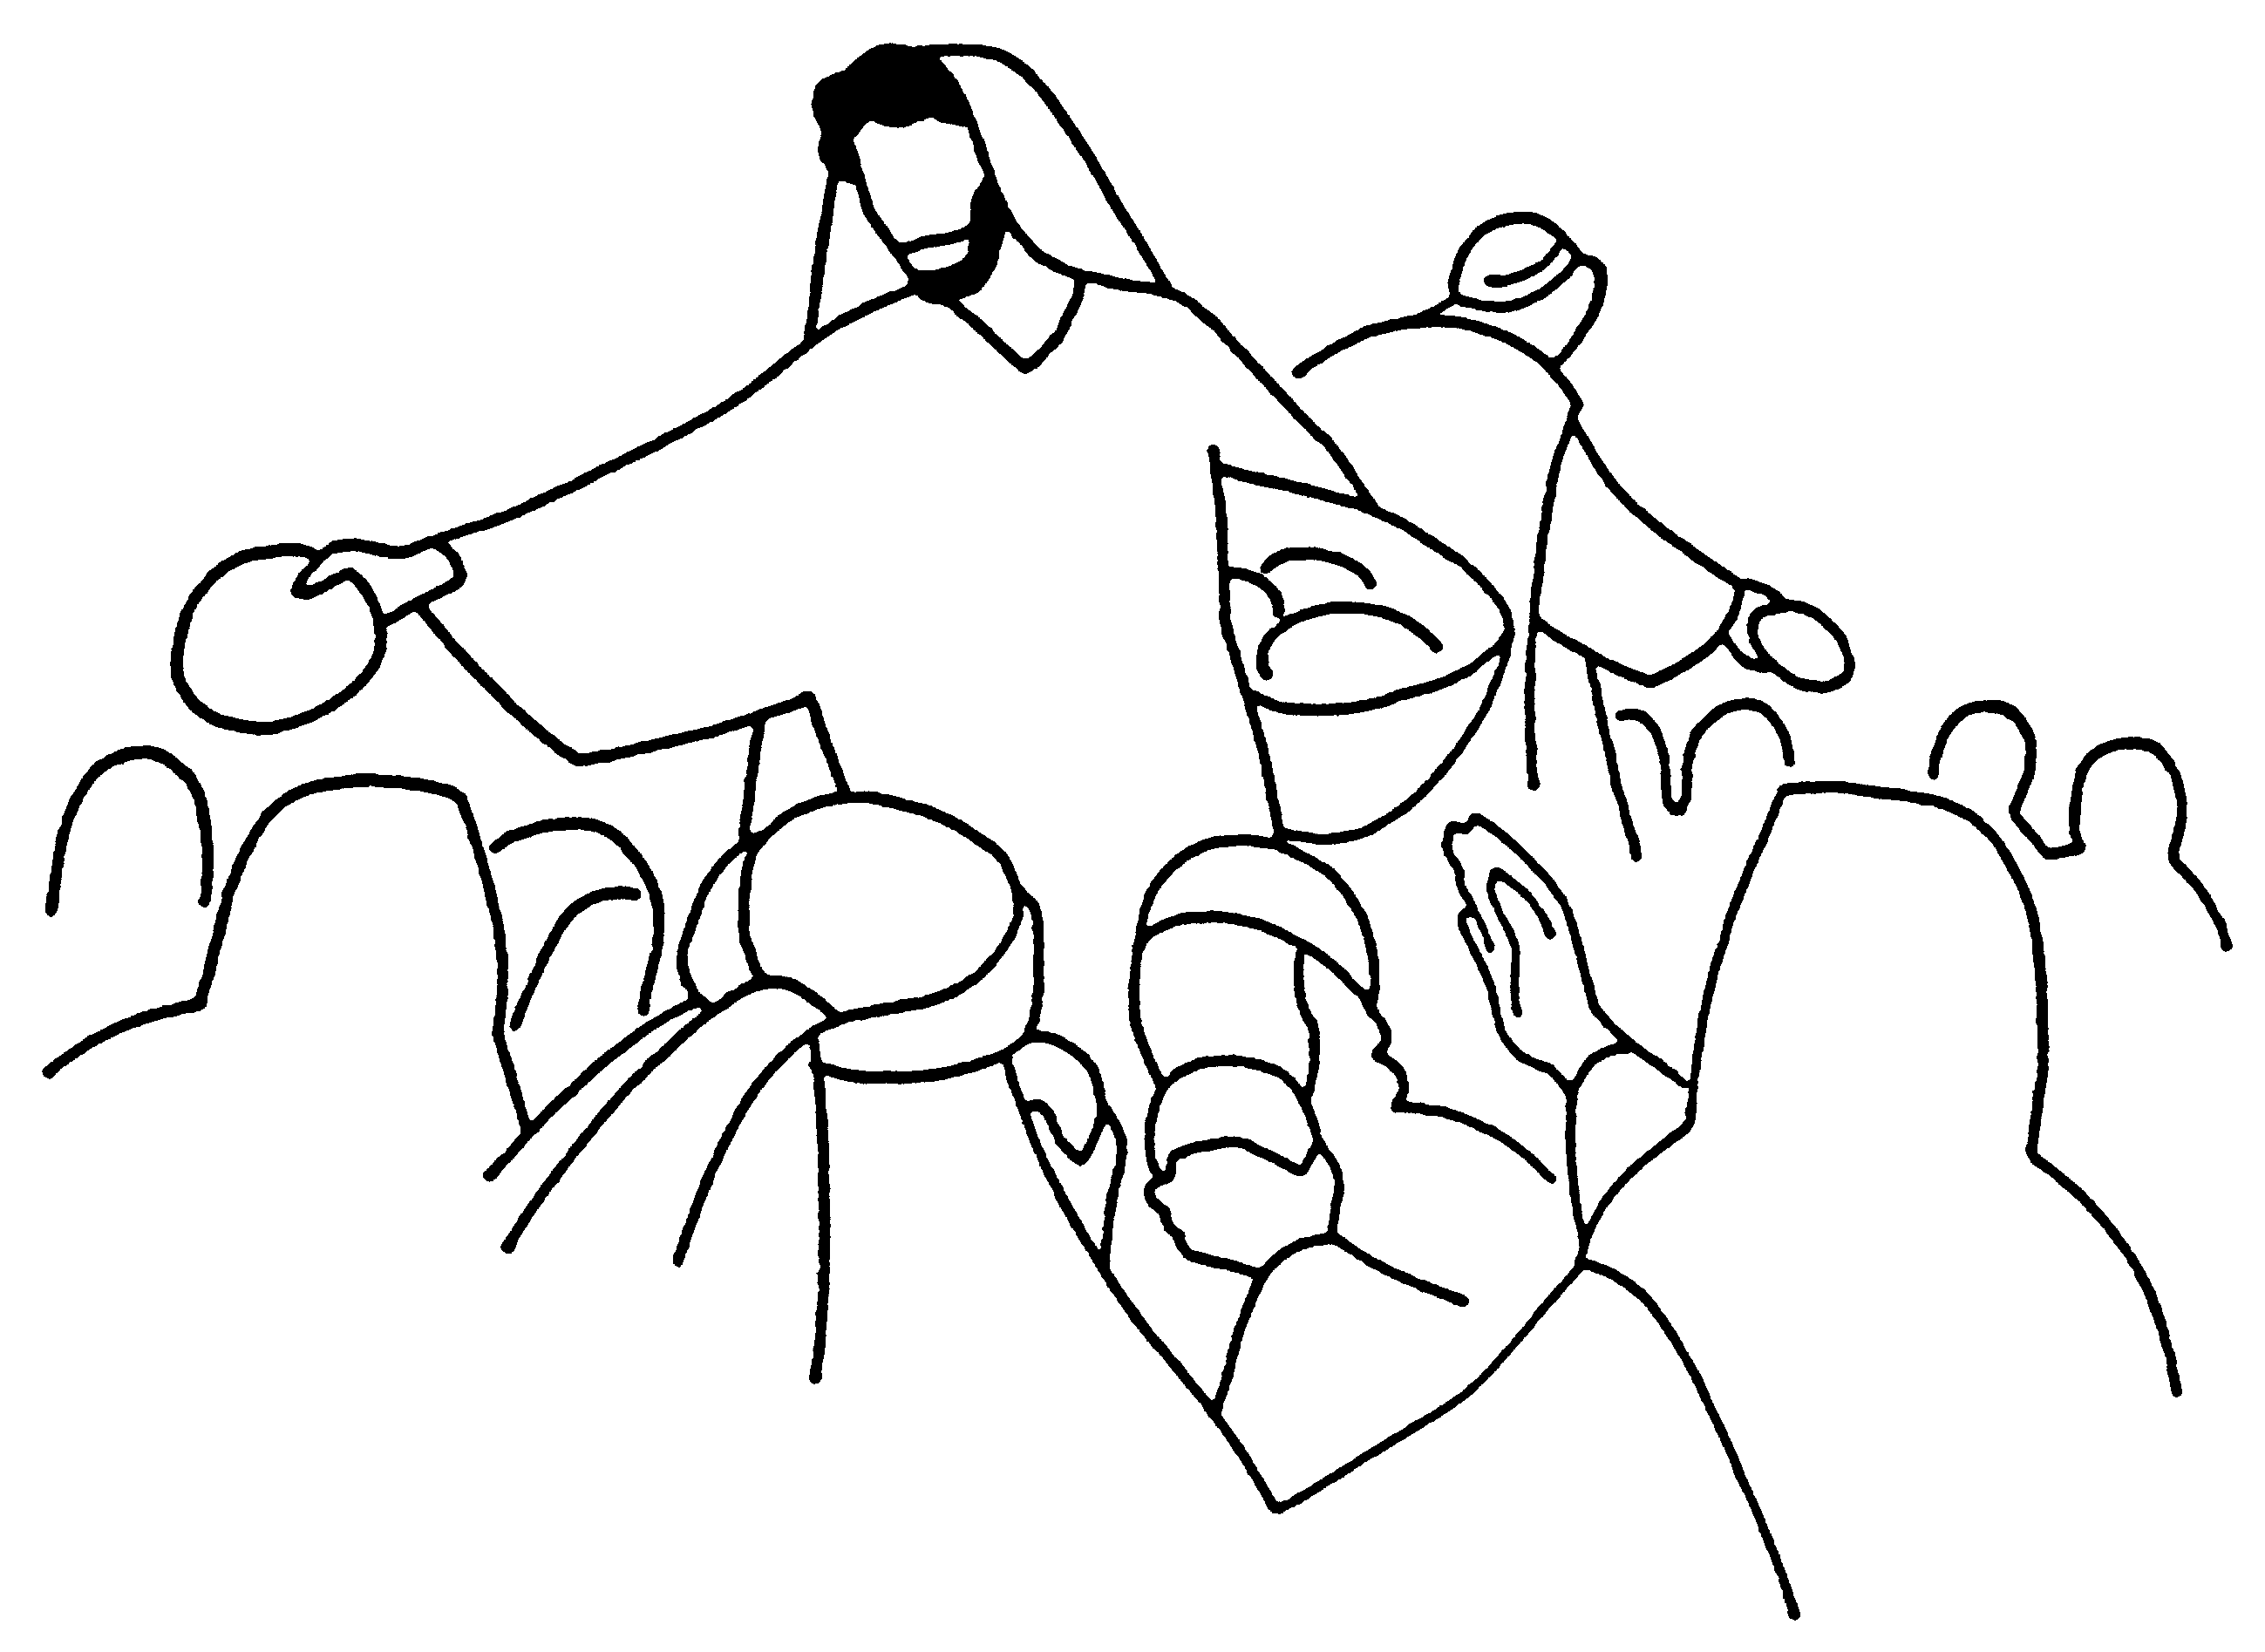 Coloring Pages -Miracles of Jesus